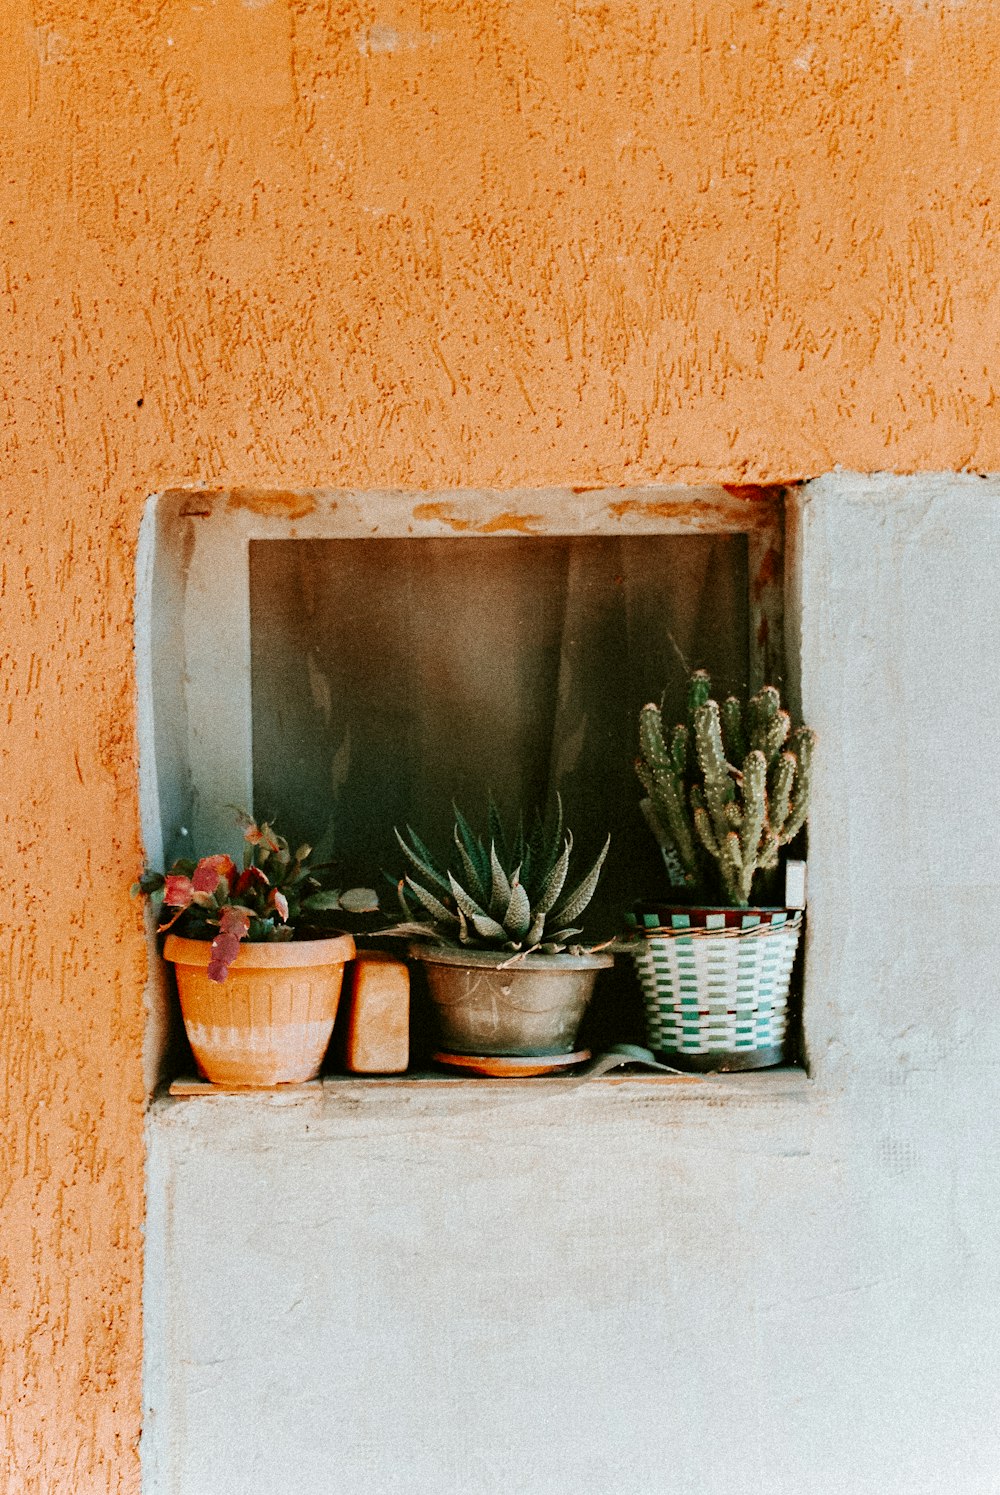 a window sill filled with potted plants next to a wall